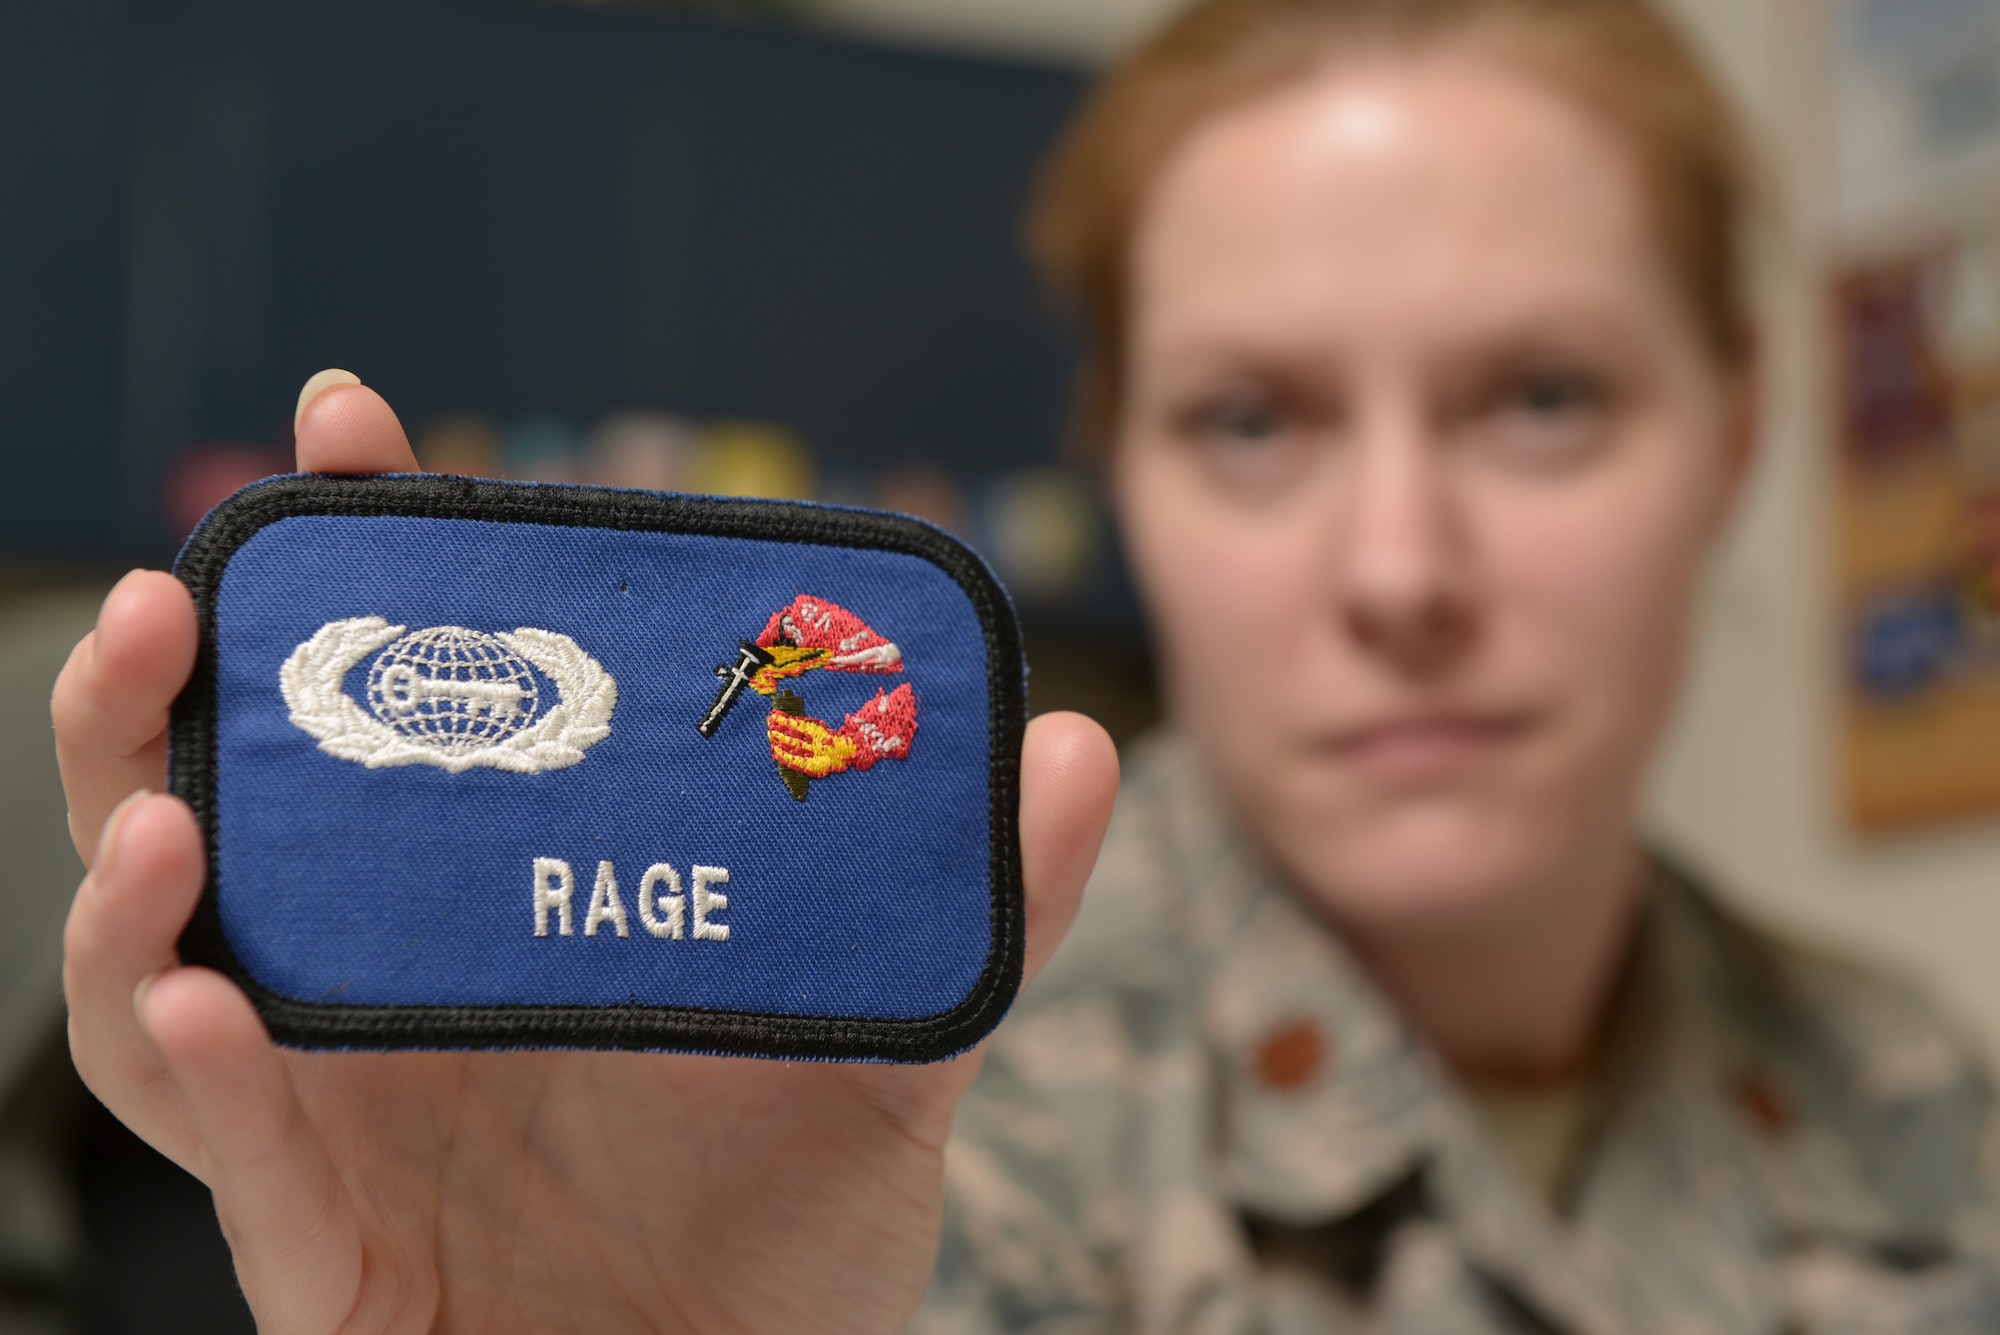 U.S. Air Force Maj. Victoria Williams, the 354th Fighter Wing senior intelligence officer, displays one of her unit patches at Eielson Air Force Base, Alaska, March 26, 2015. Williams advises the wing commander and senior leaders on any threats to their forces at home or deployed and manages intelligence professionals assigned to the wing. (U.S. Air Force photo by Senior Airman Peter Reft/Released)¬¬¬¬